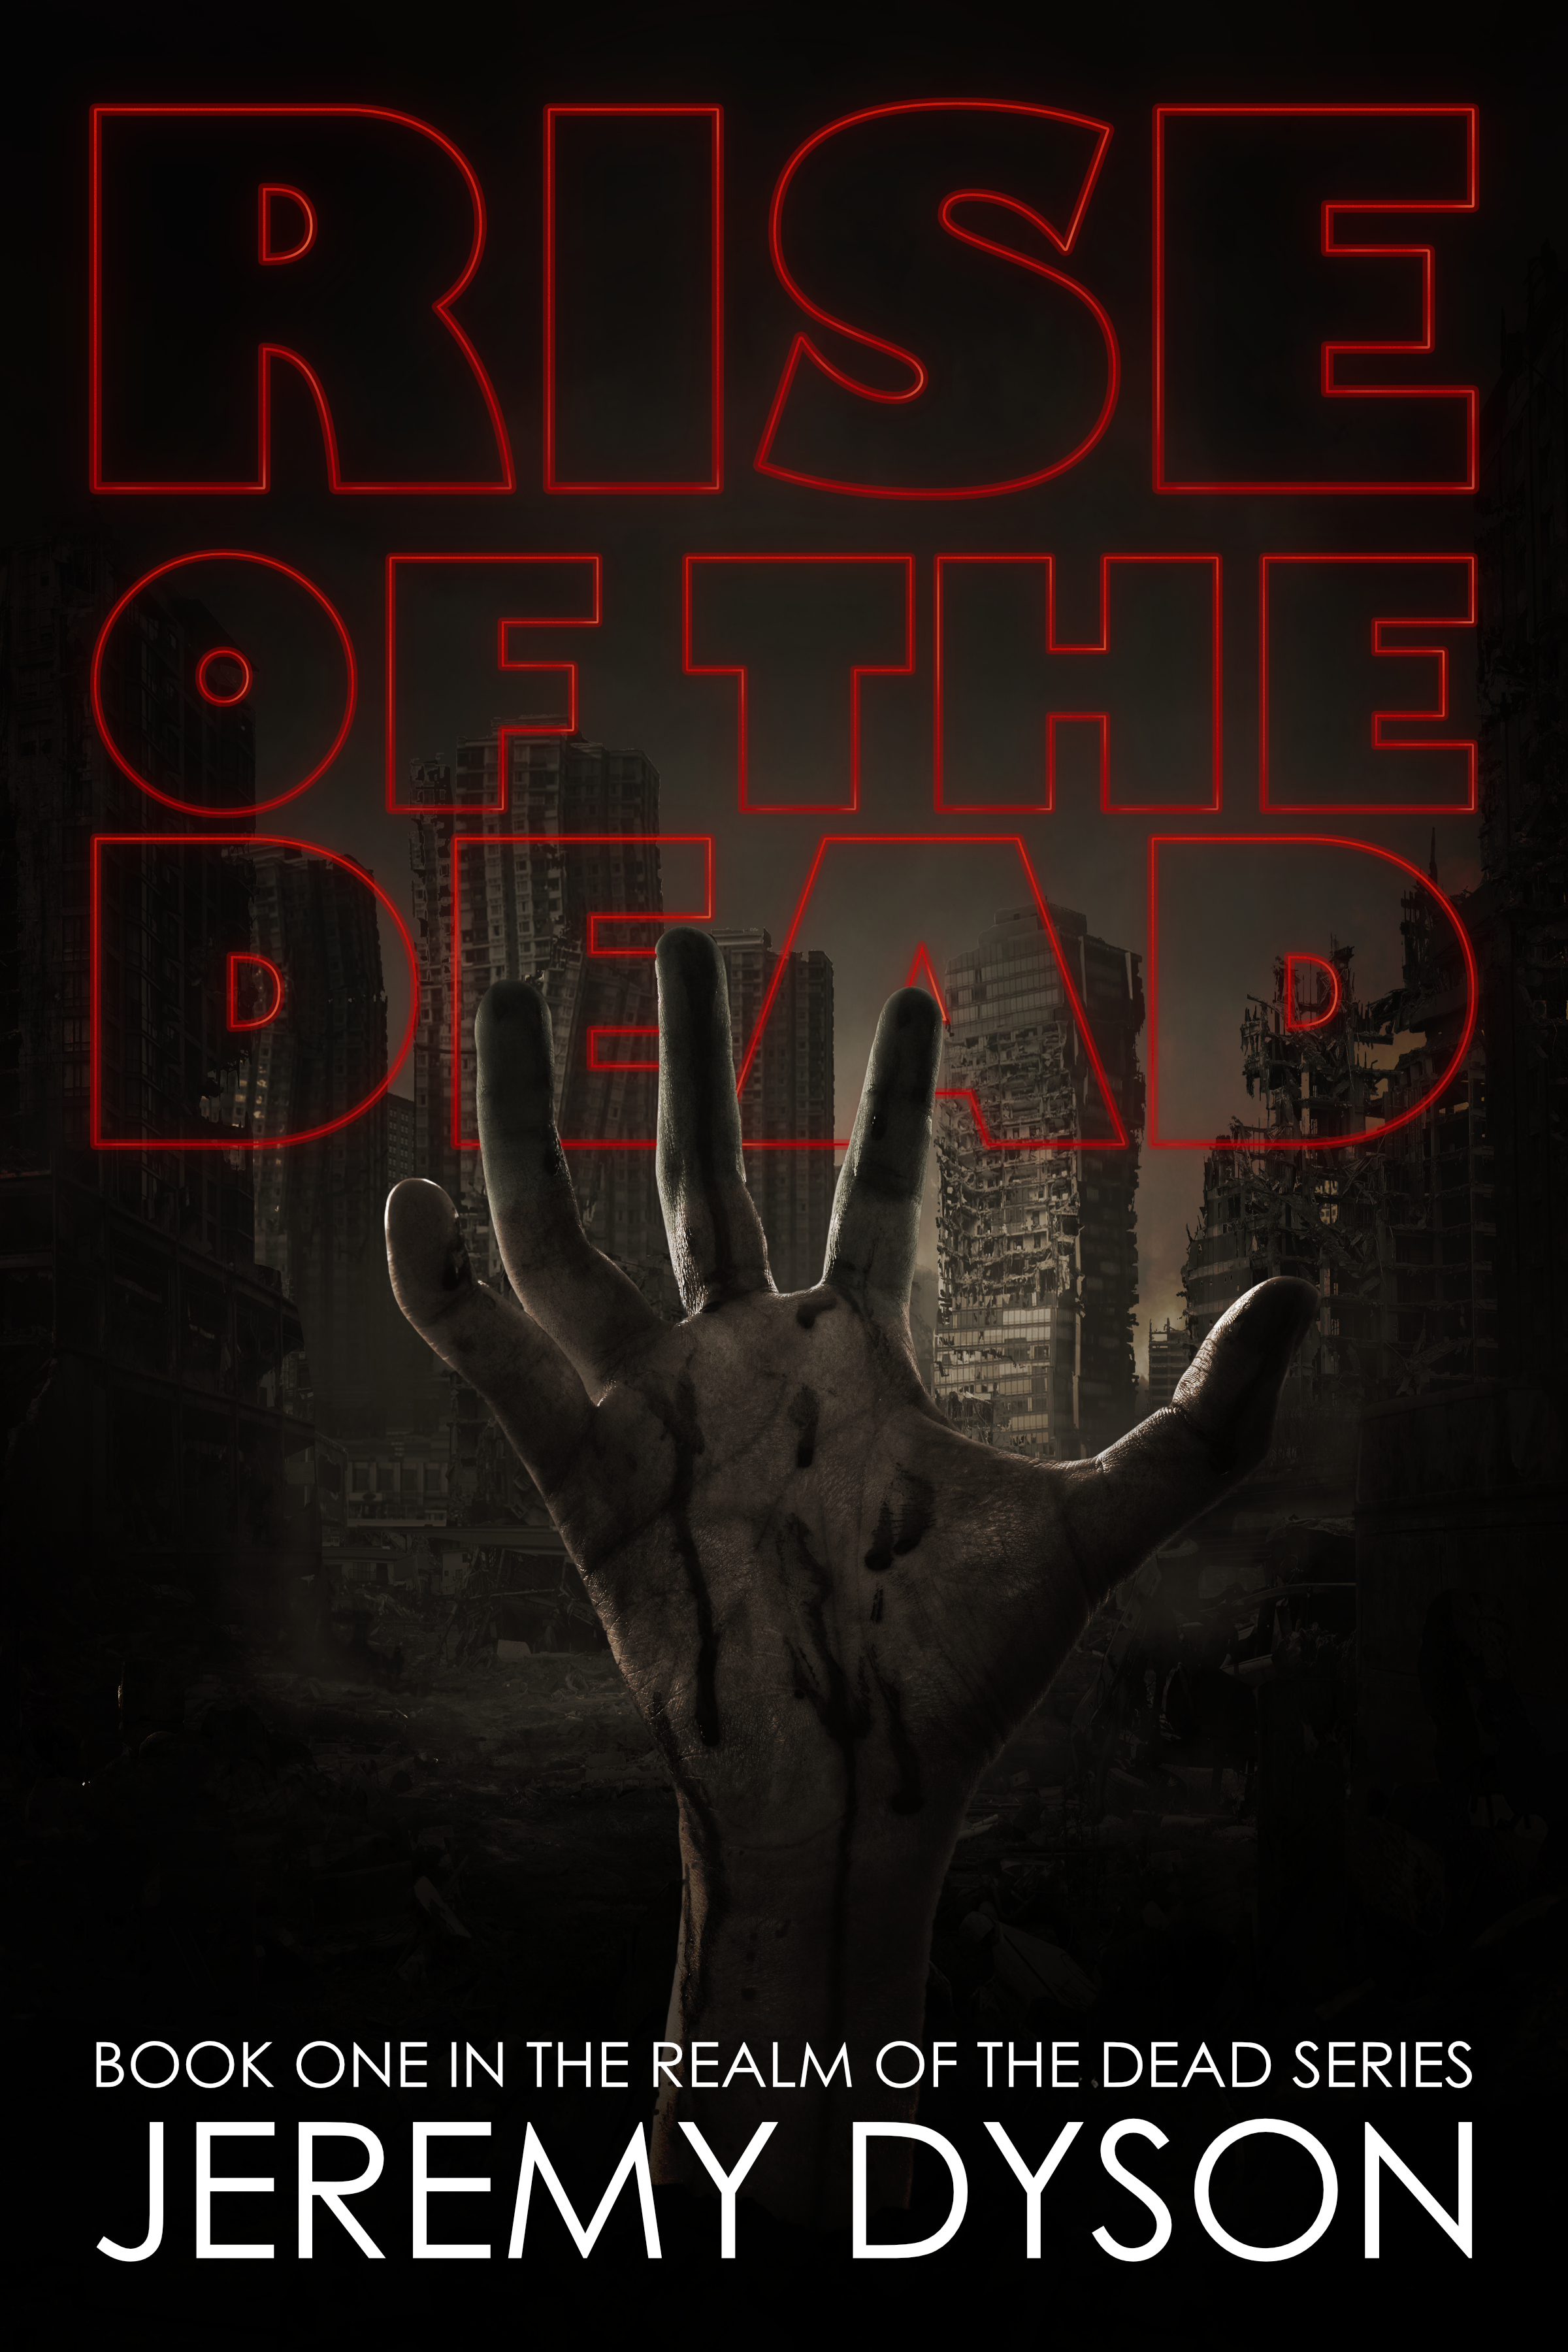 144-rise-of-the-dead-ebook-cover.jpg